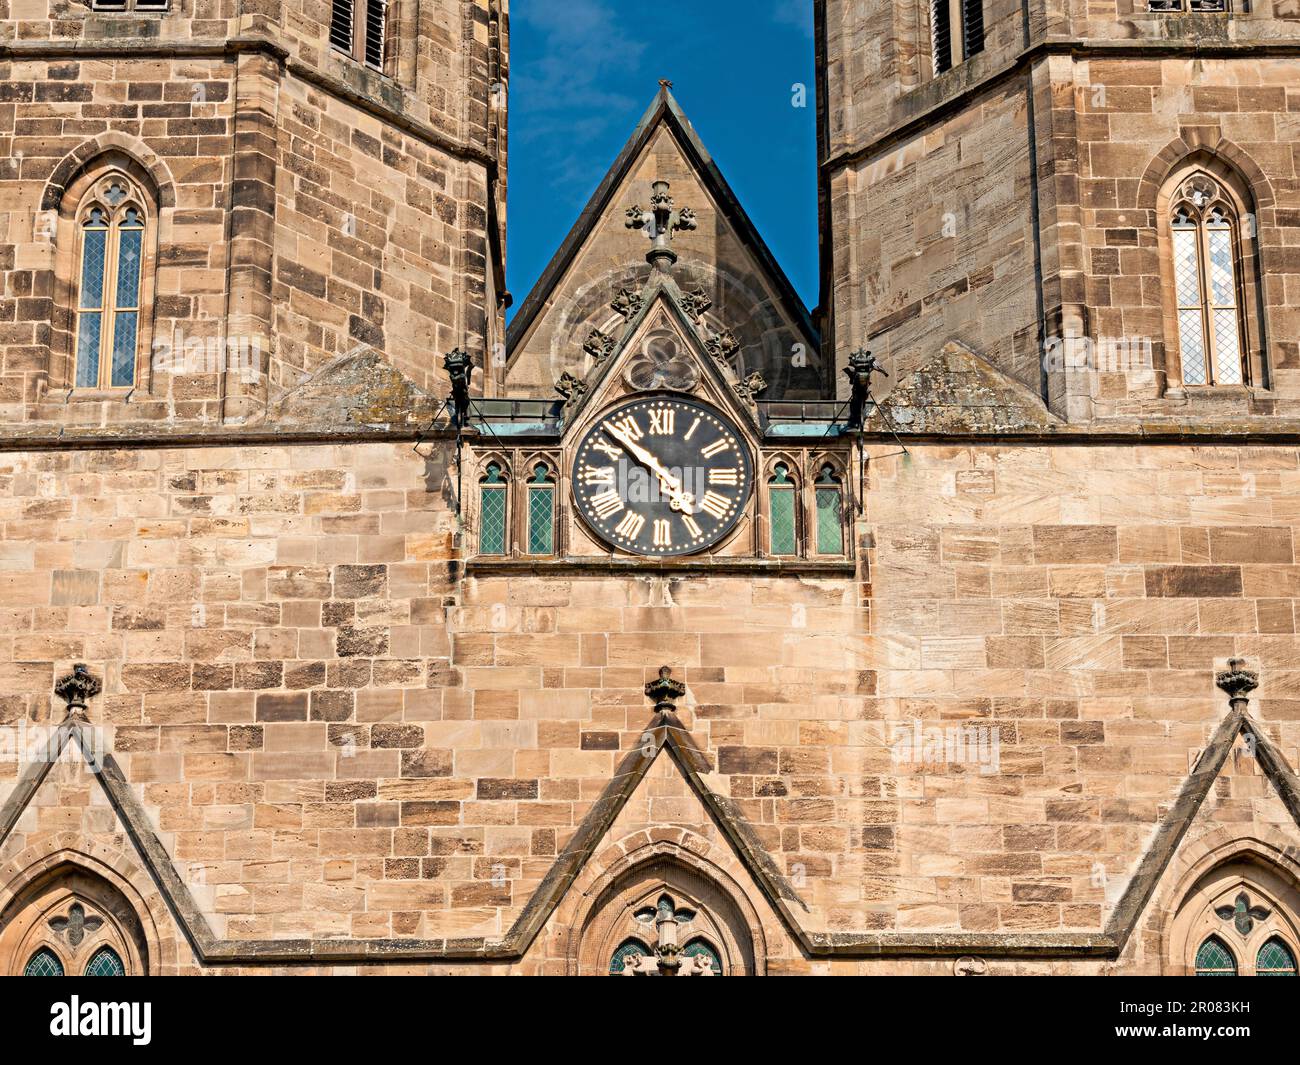 Detail of the portal with tower clock of the Basilica St. Cyriakus in Duderstadt, Germany Stock Photo